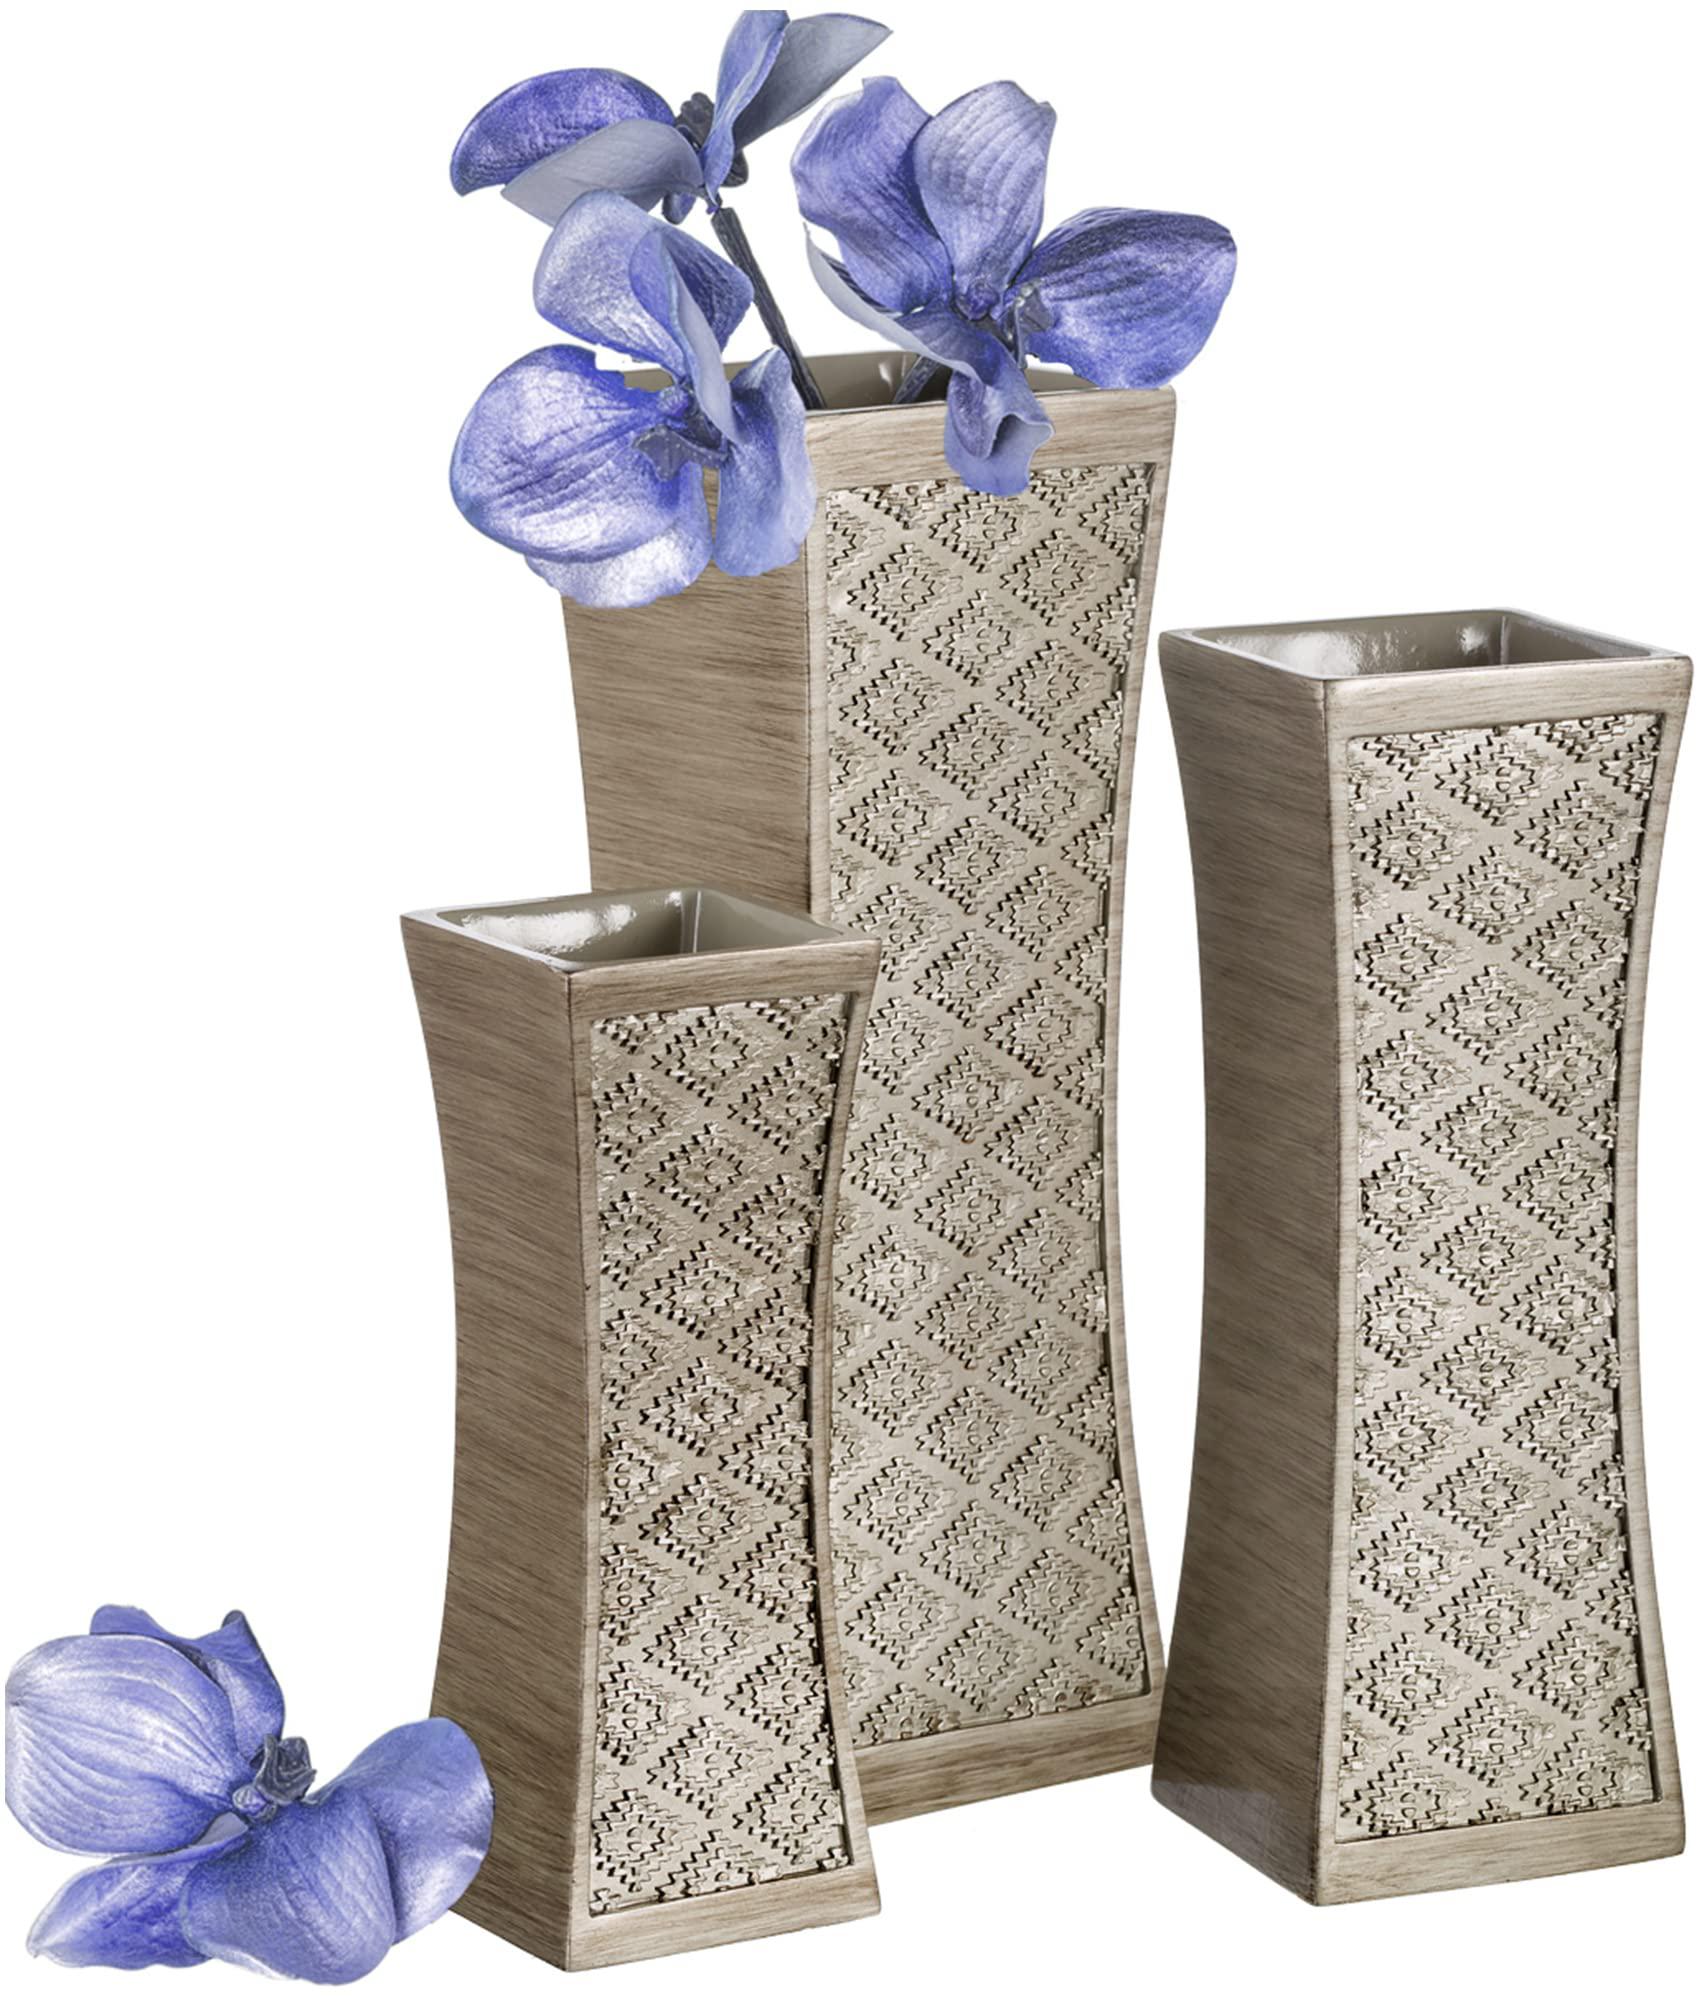 Creative Scents dublin flower vase set of 3 - centerpieces for dining room table, decorative vases home decor accents for living room, bedroo